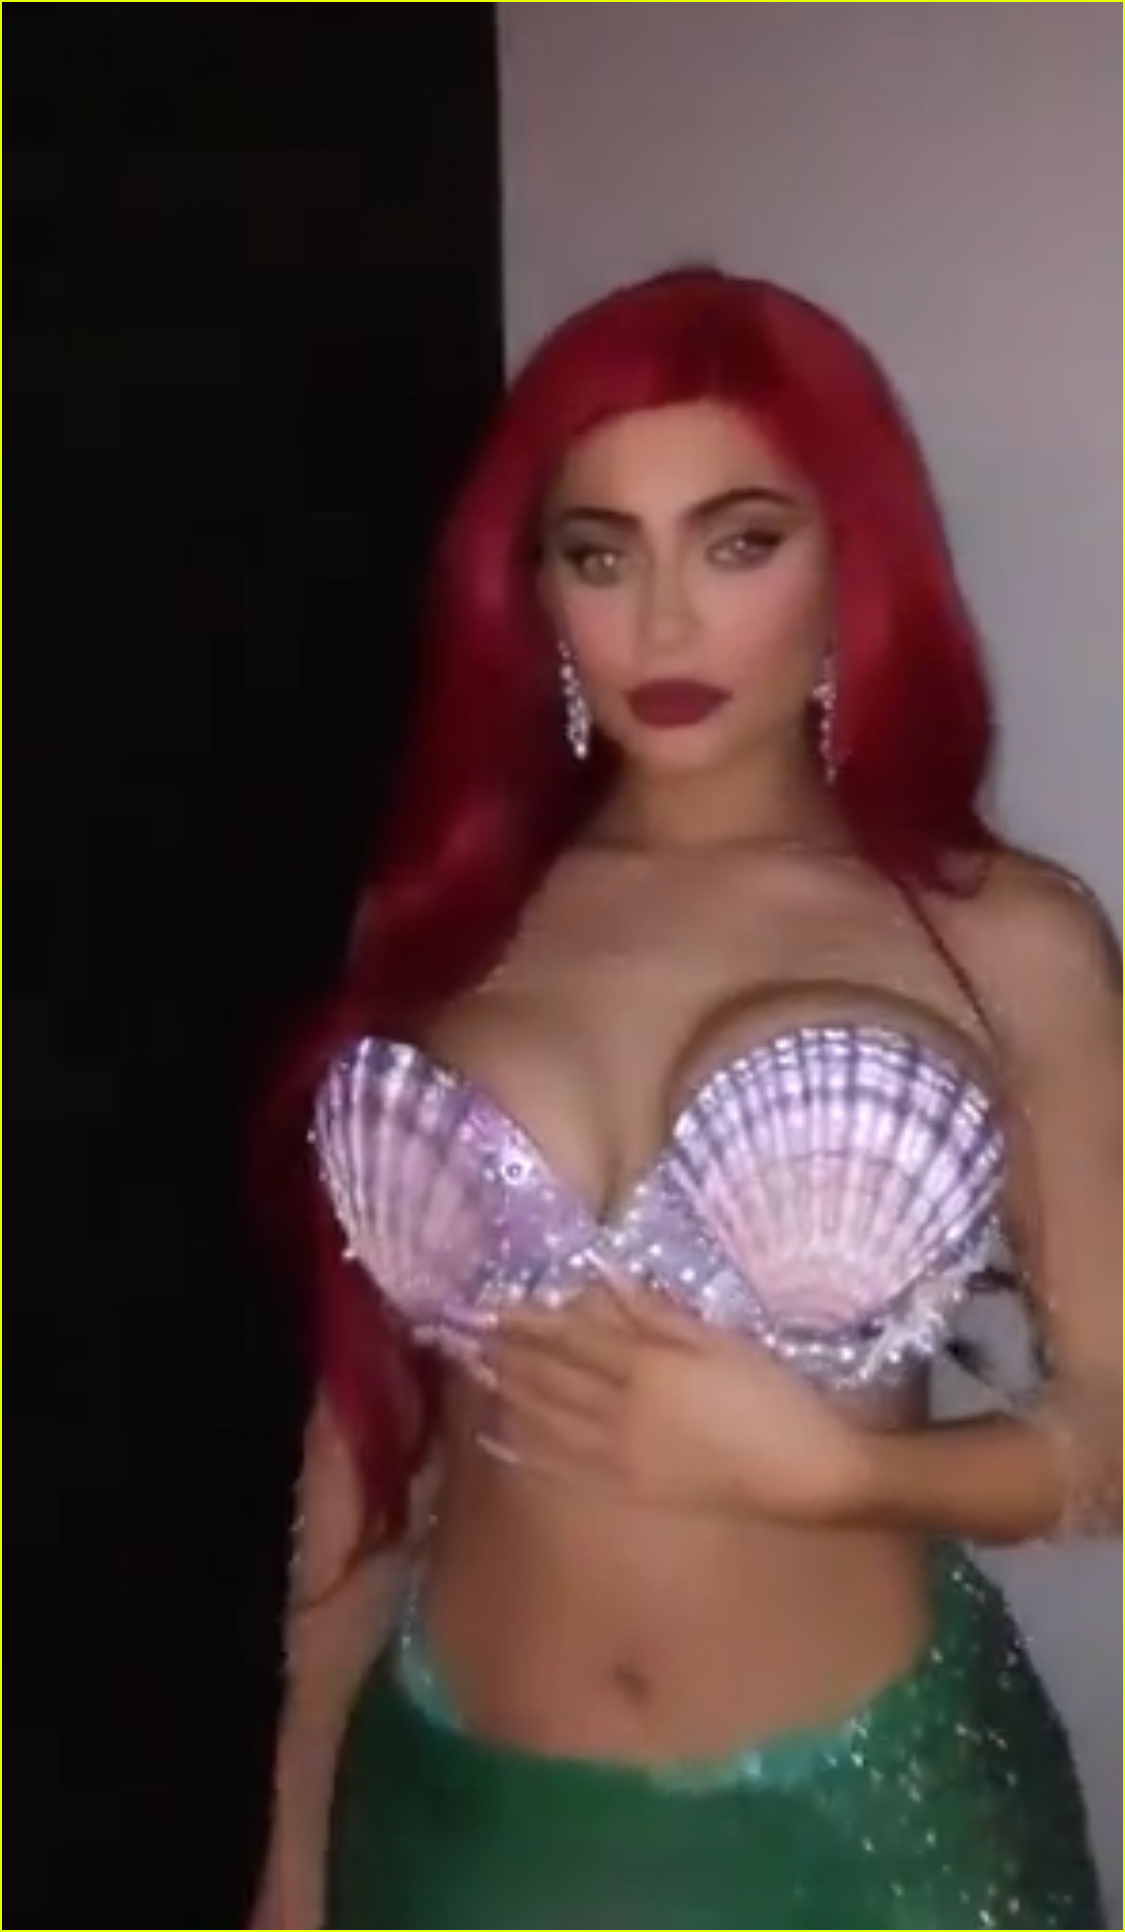 kylie jenner dresses as super sexy ariel from the little mermaid for halloween 10